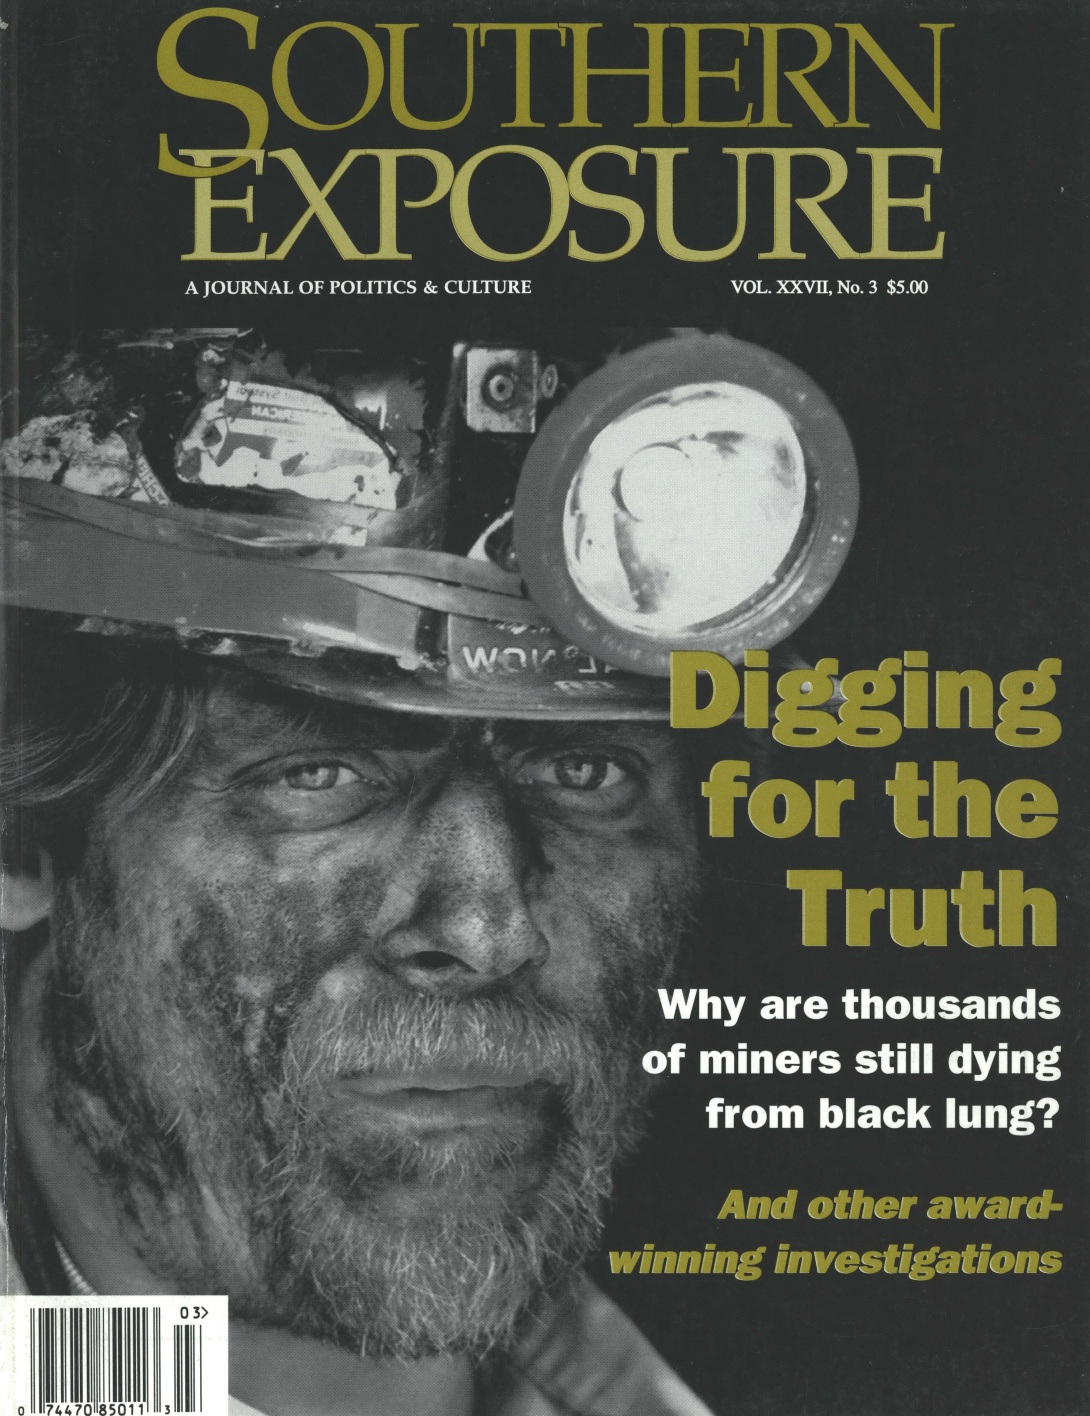 Magazine cover with black and white photo of male miner in hard hat with dirty face, text reads "Digging for the Truth"